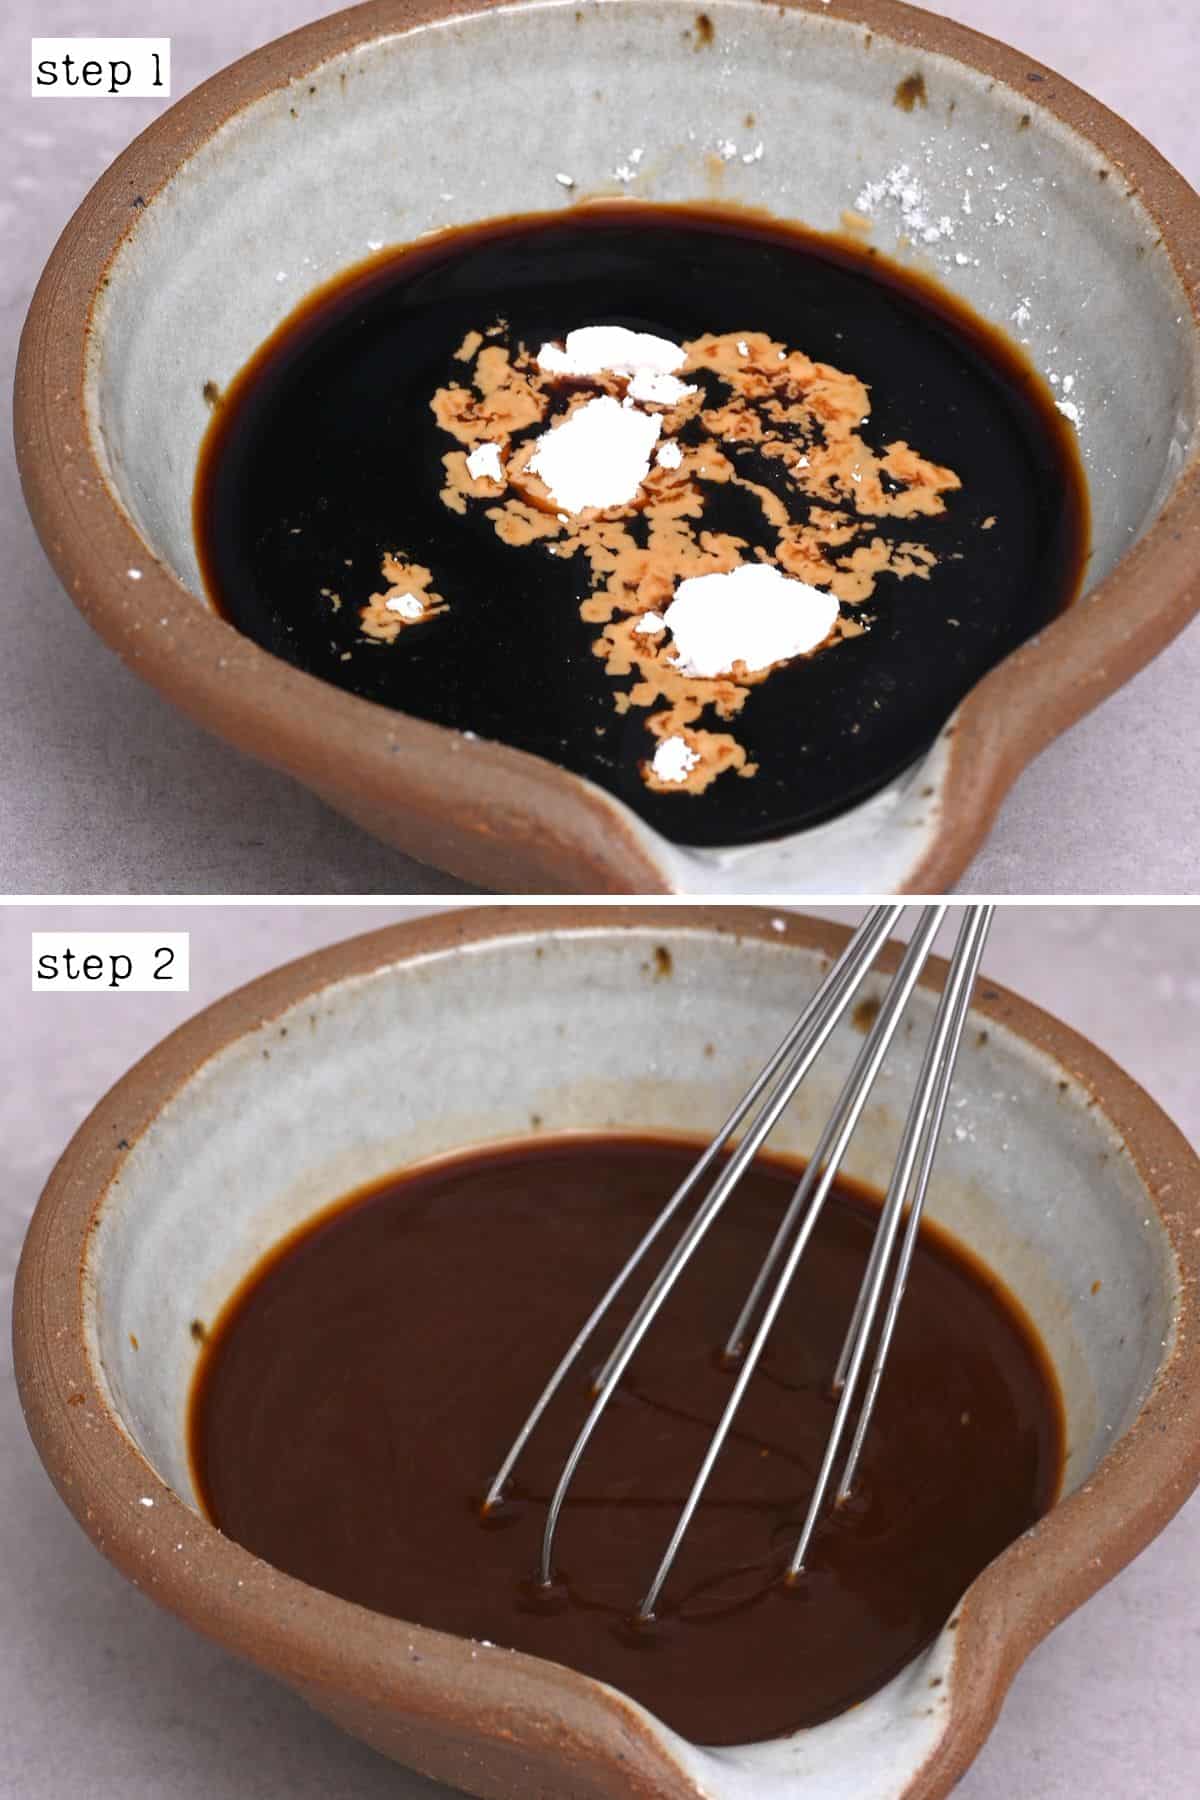 Steps for preparing a sauce